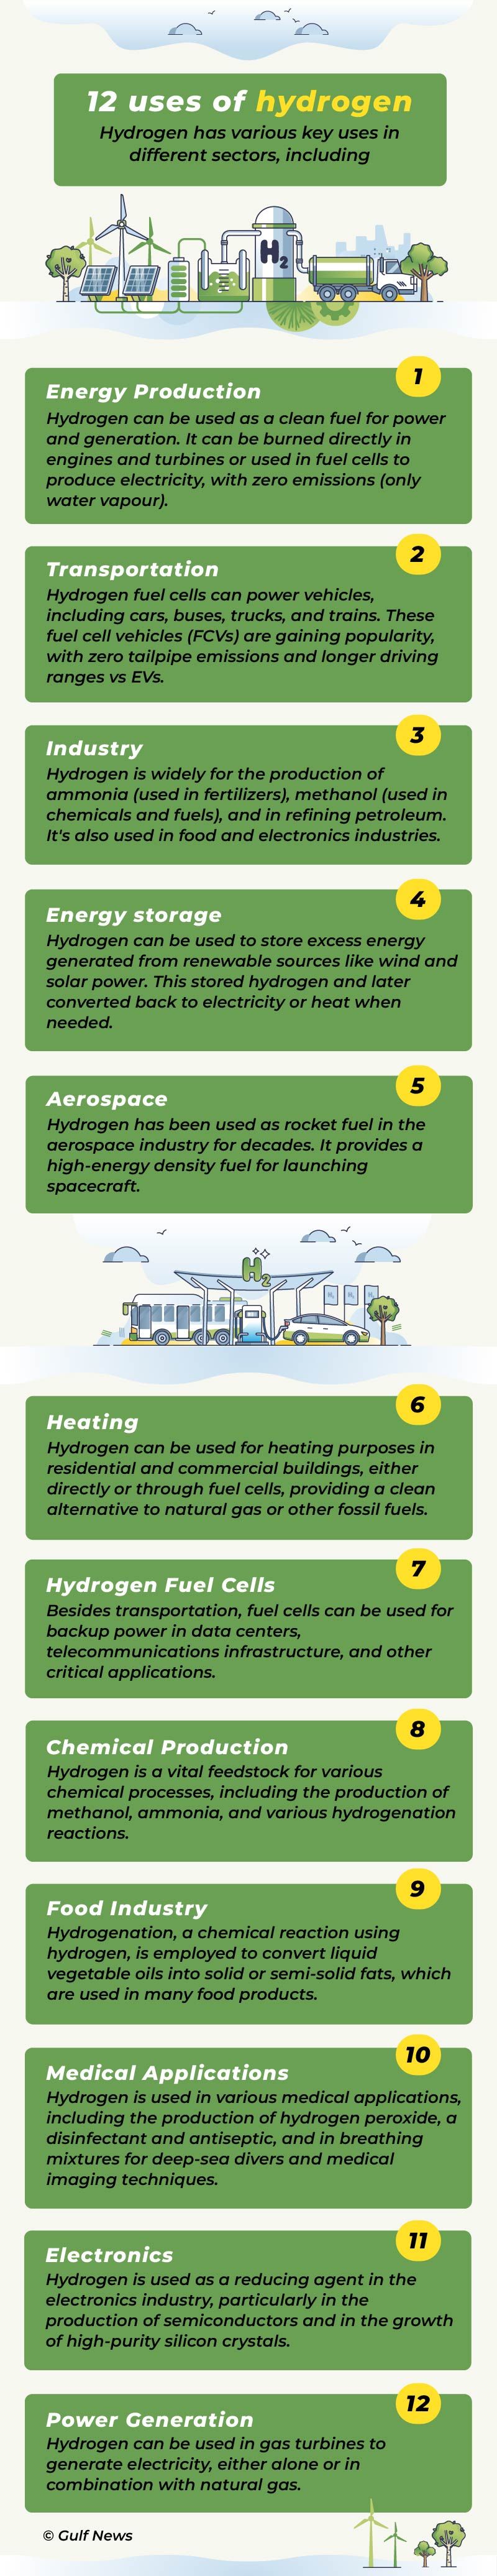 12 uses of hydrogen